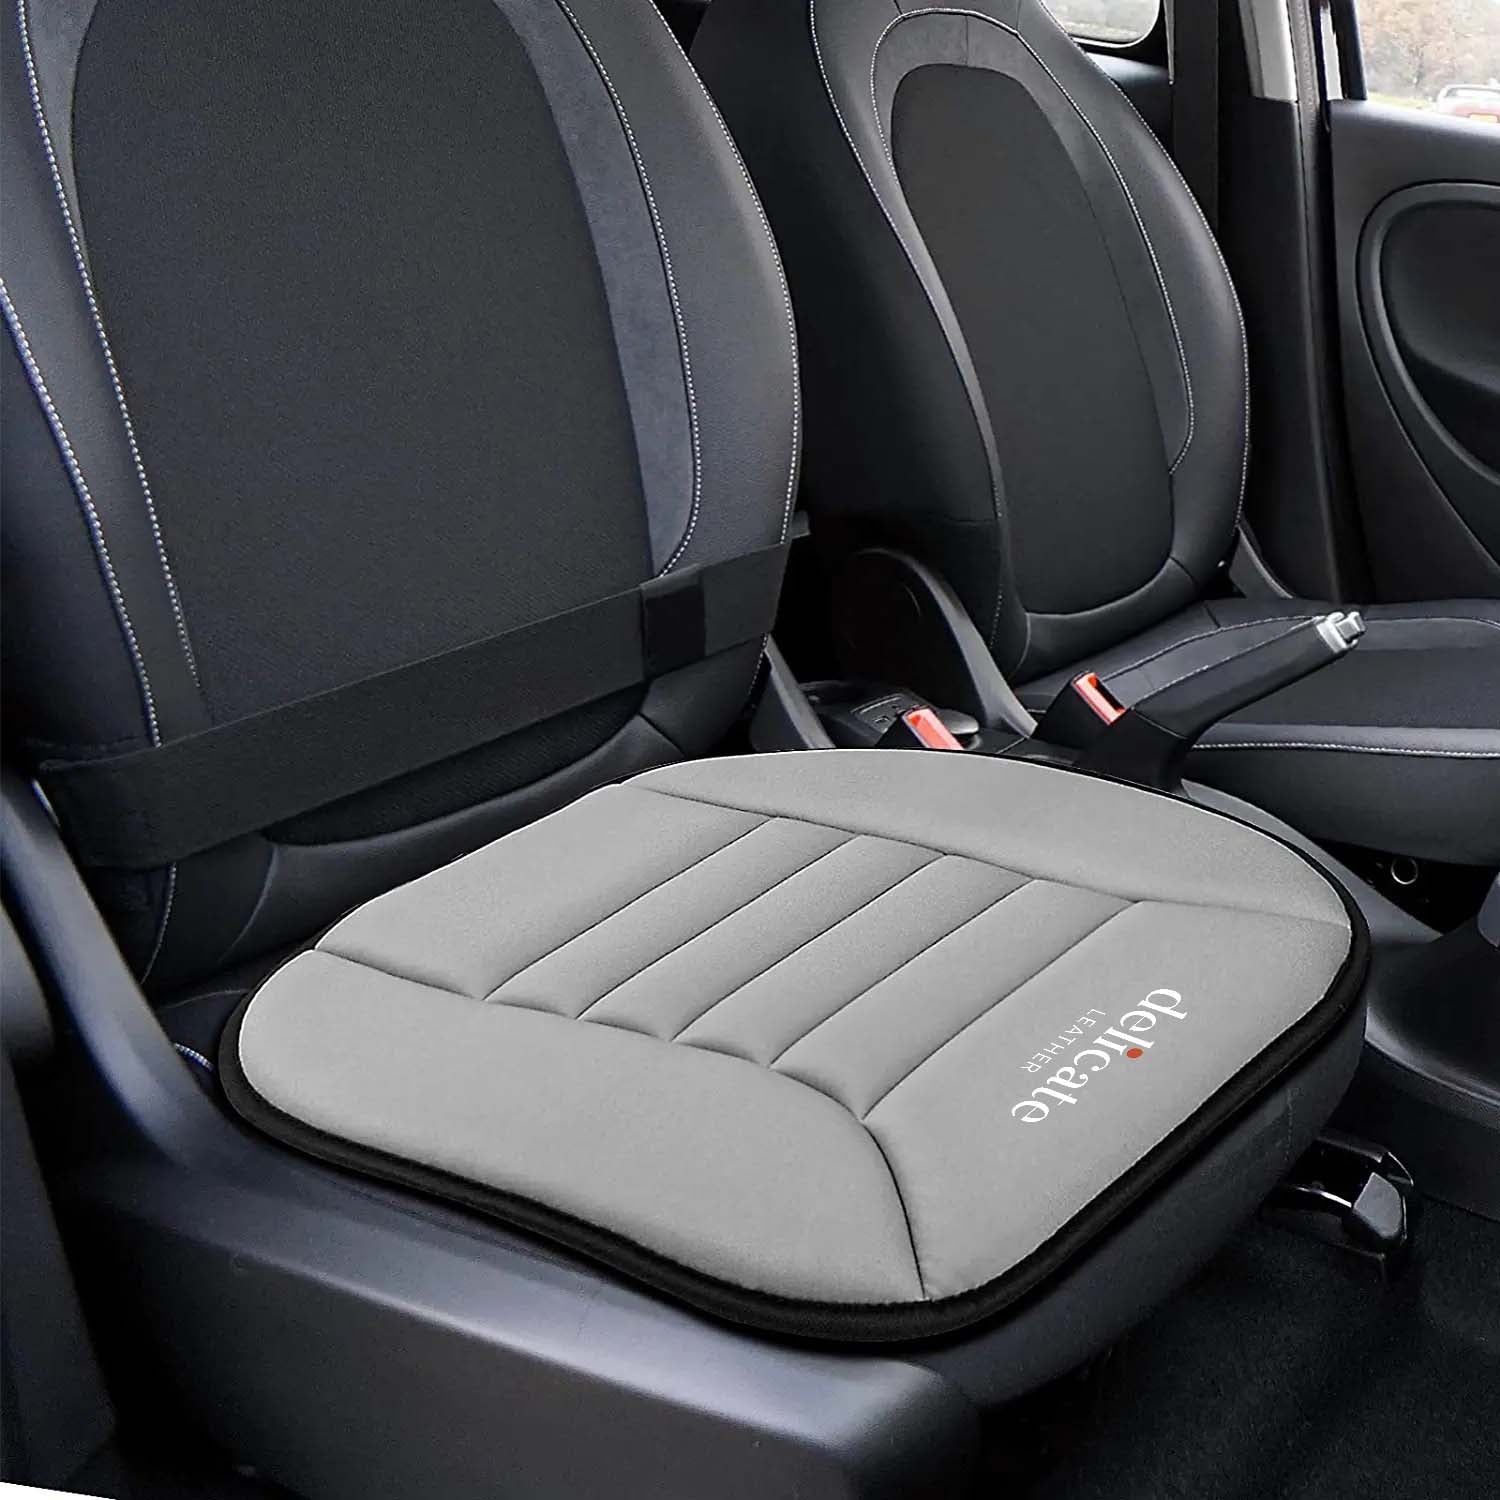 Ford Car Seat Cushion: Enhance Comfort and Support for Your Drive